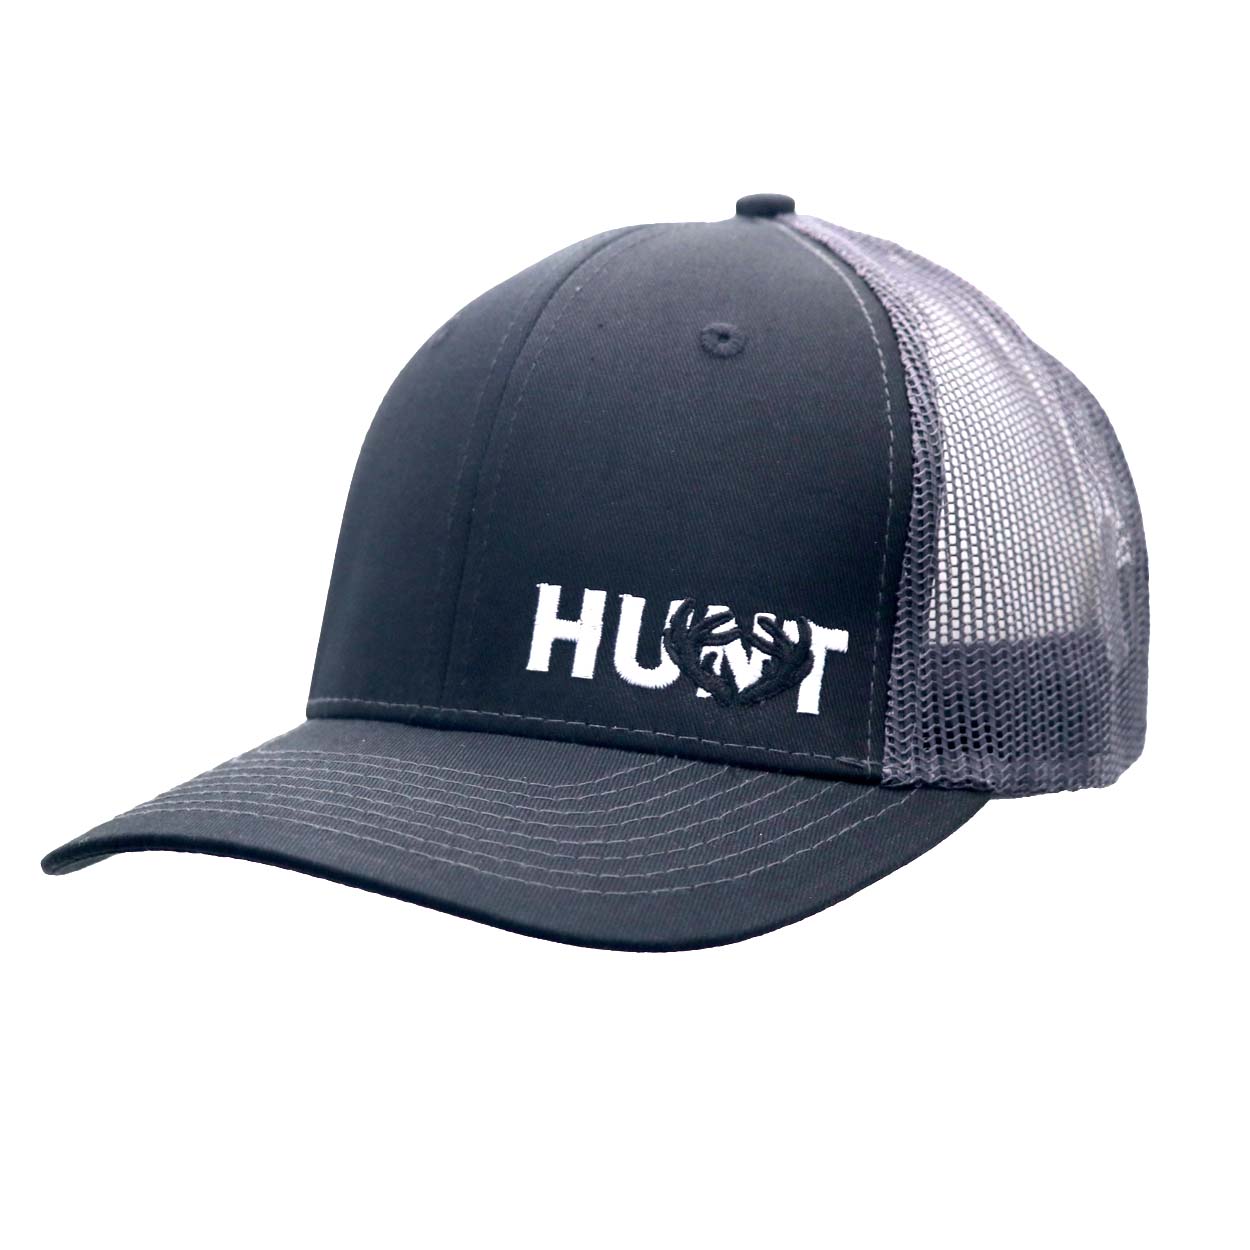 Hunt Rack Logo Night Out Embroidered Snapback Trucker Hat Black/Charcoal